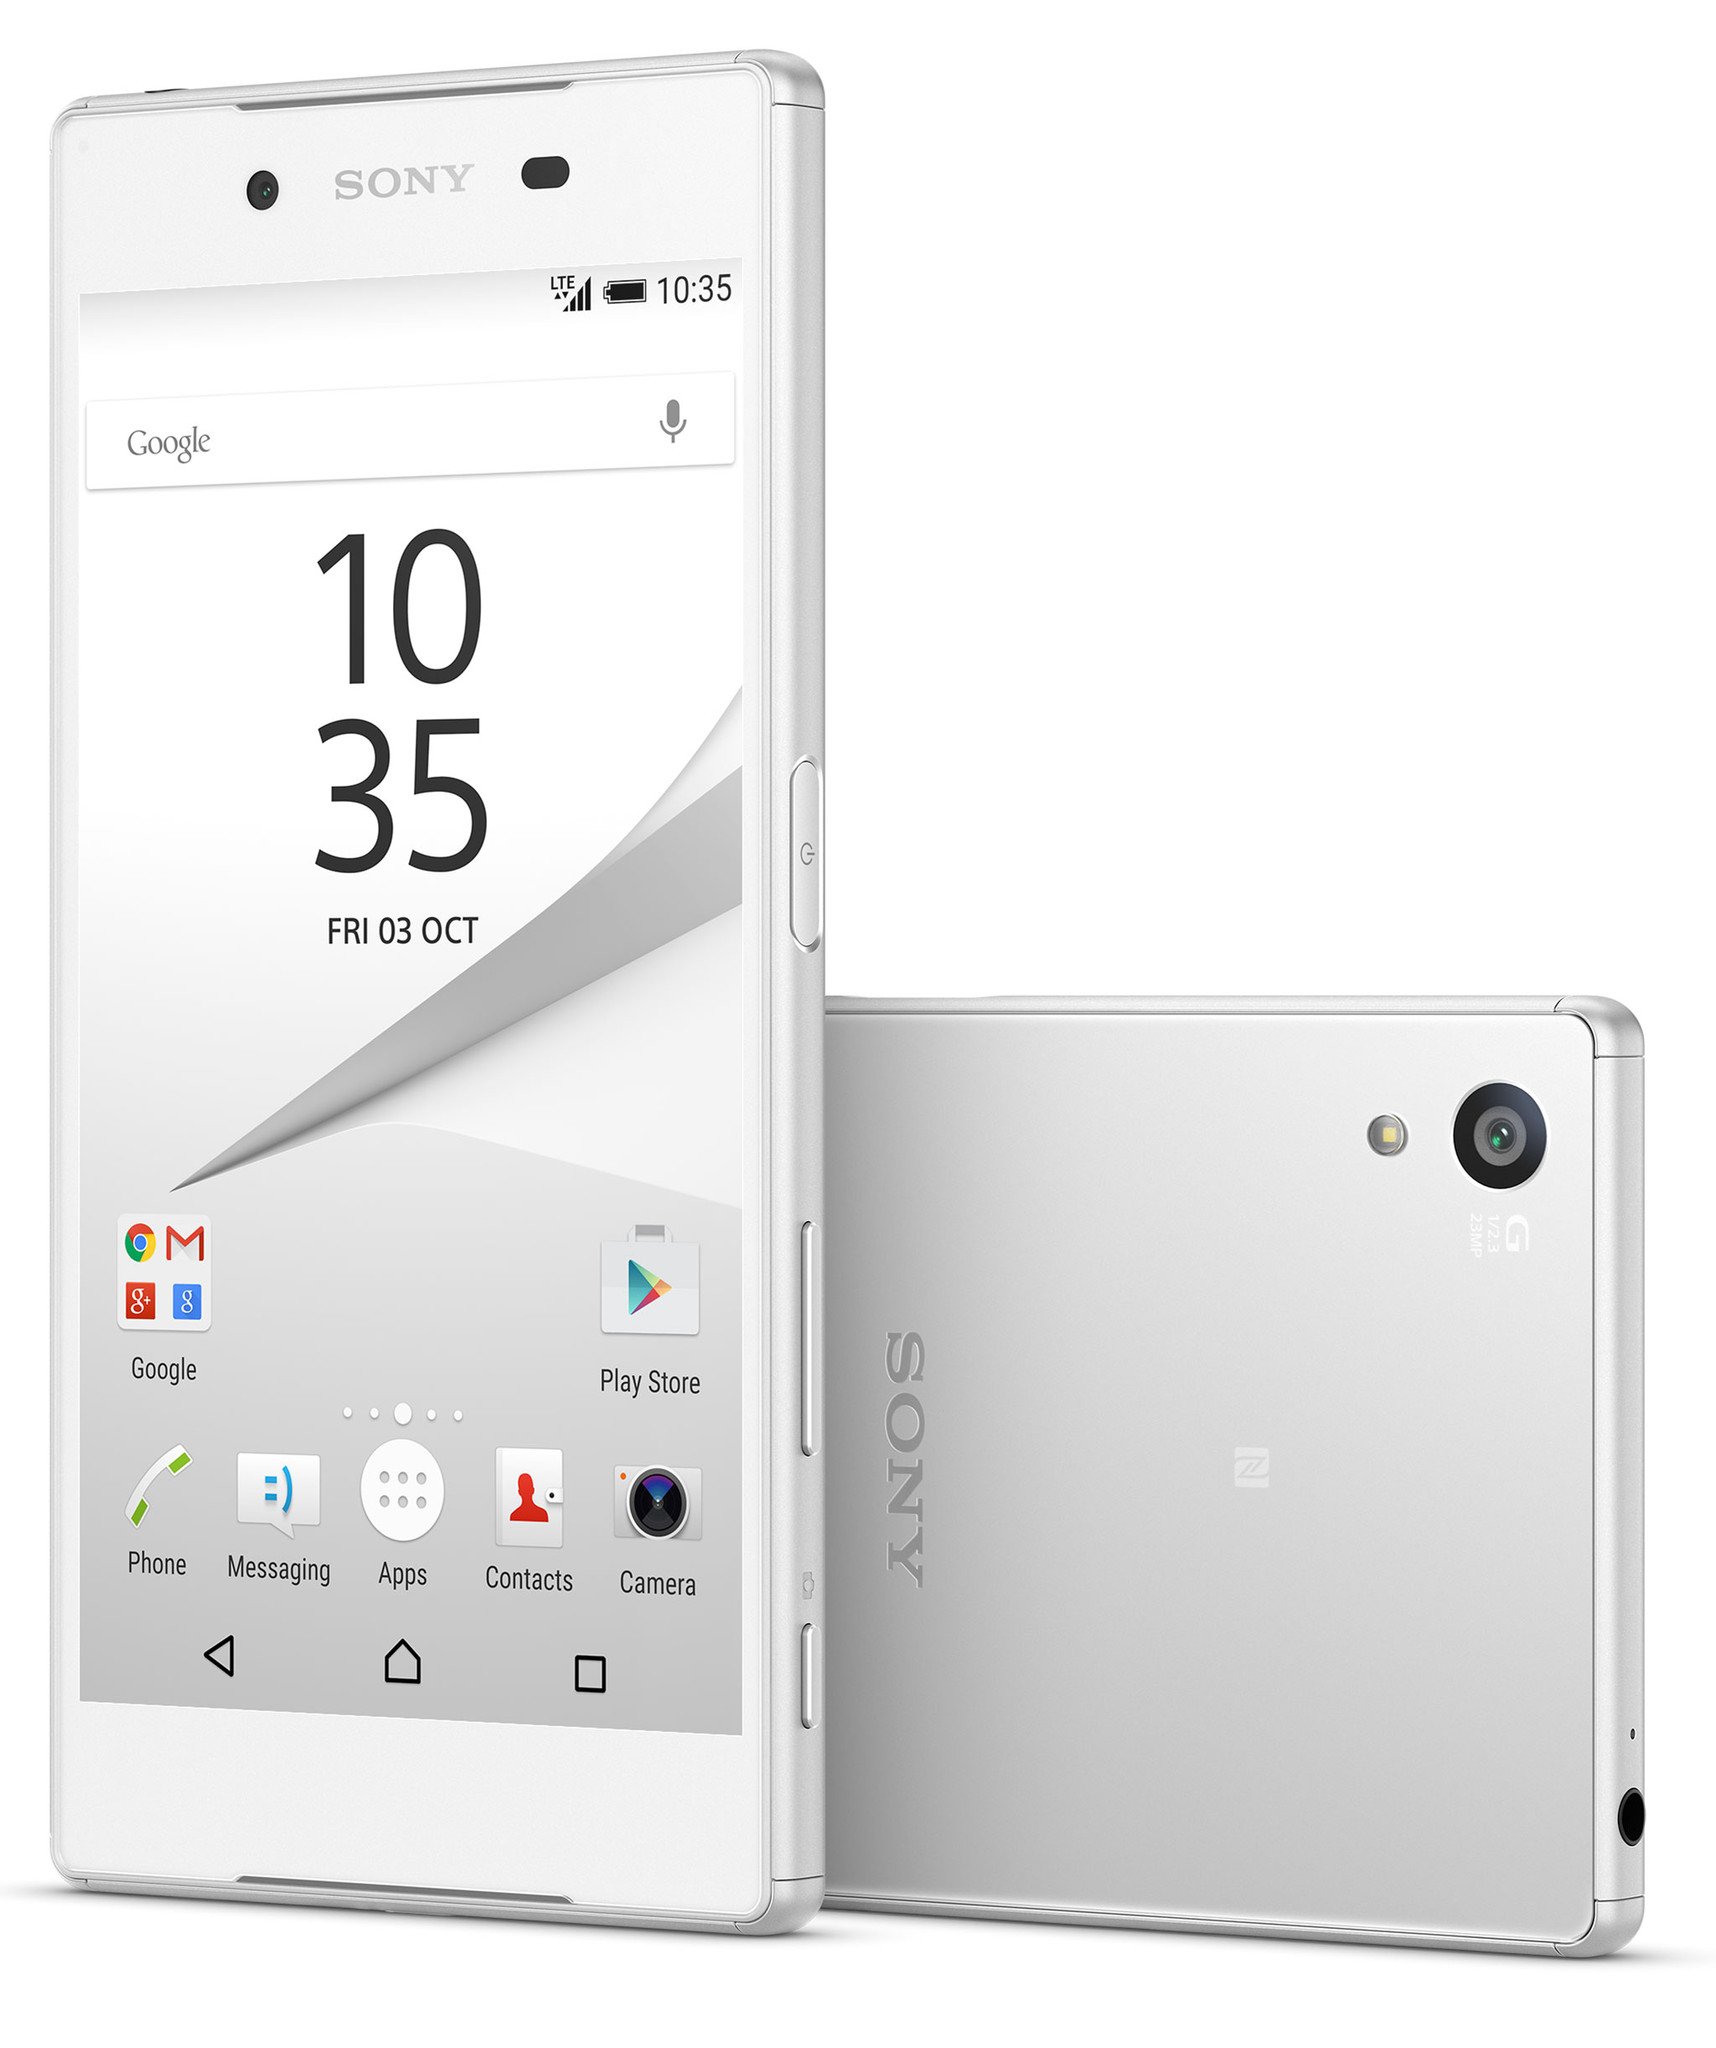 Sony Xperia Z5 specs | Android Central